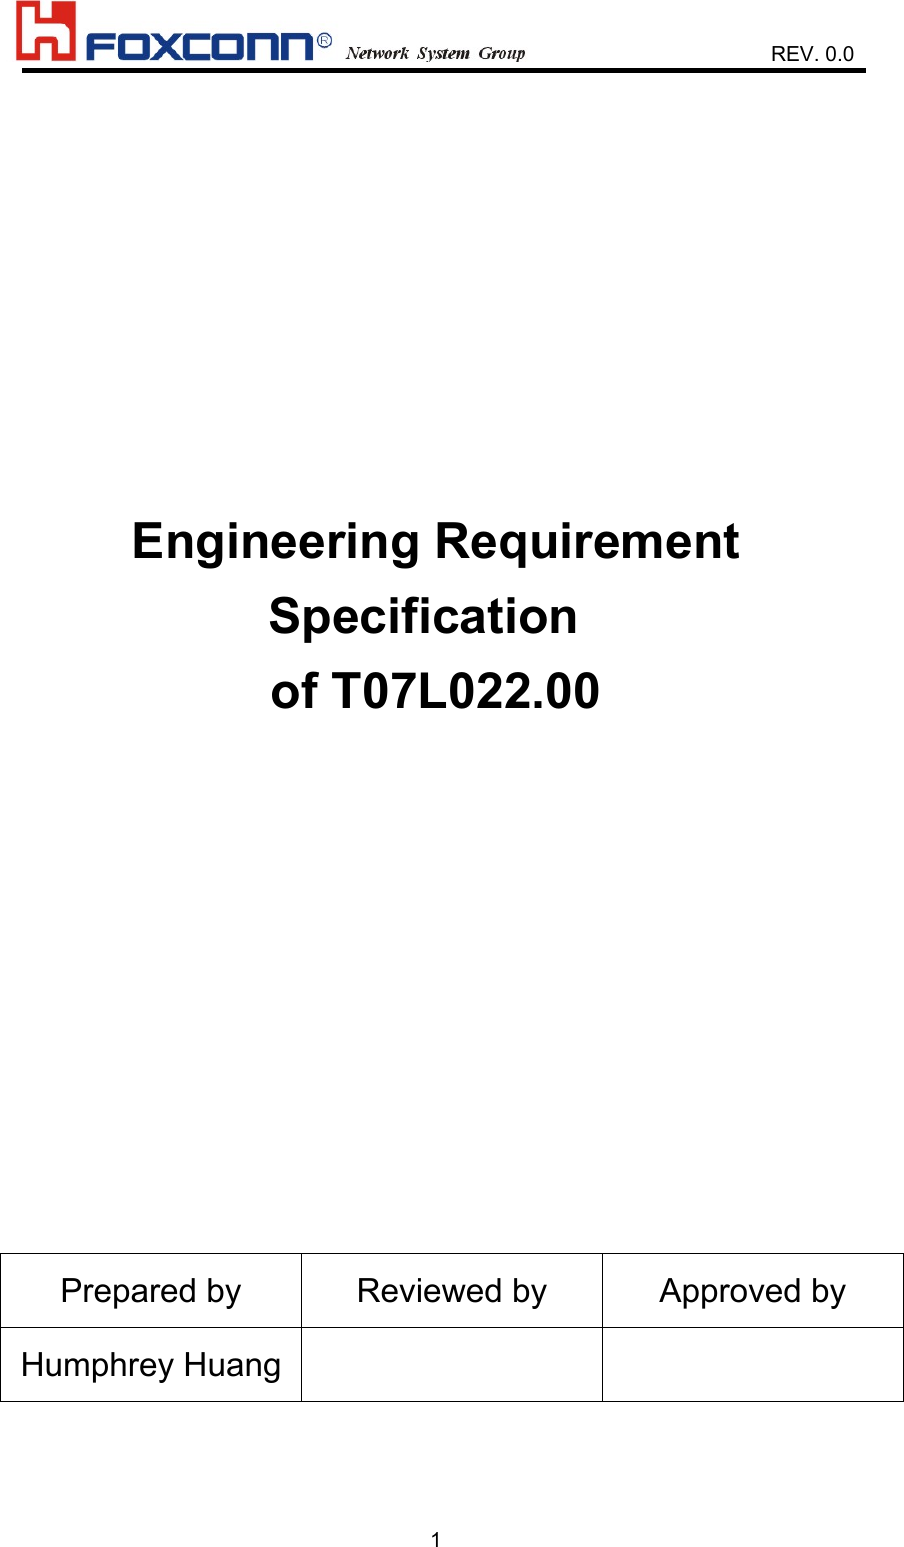                    REV. 0.01Engineering RequirementSpecification of T07L022.00Prepared by Reviewed by Approved byHumphrey Huang